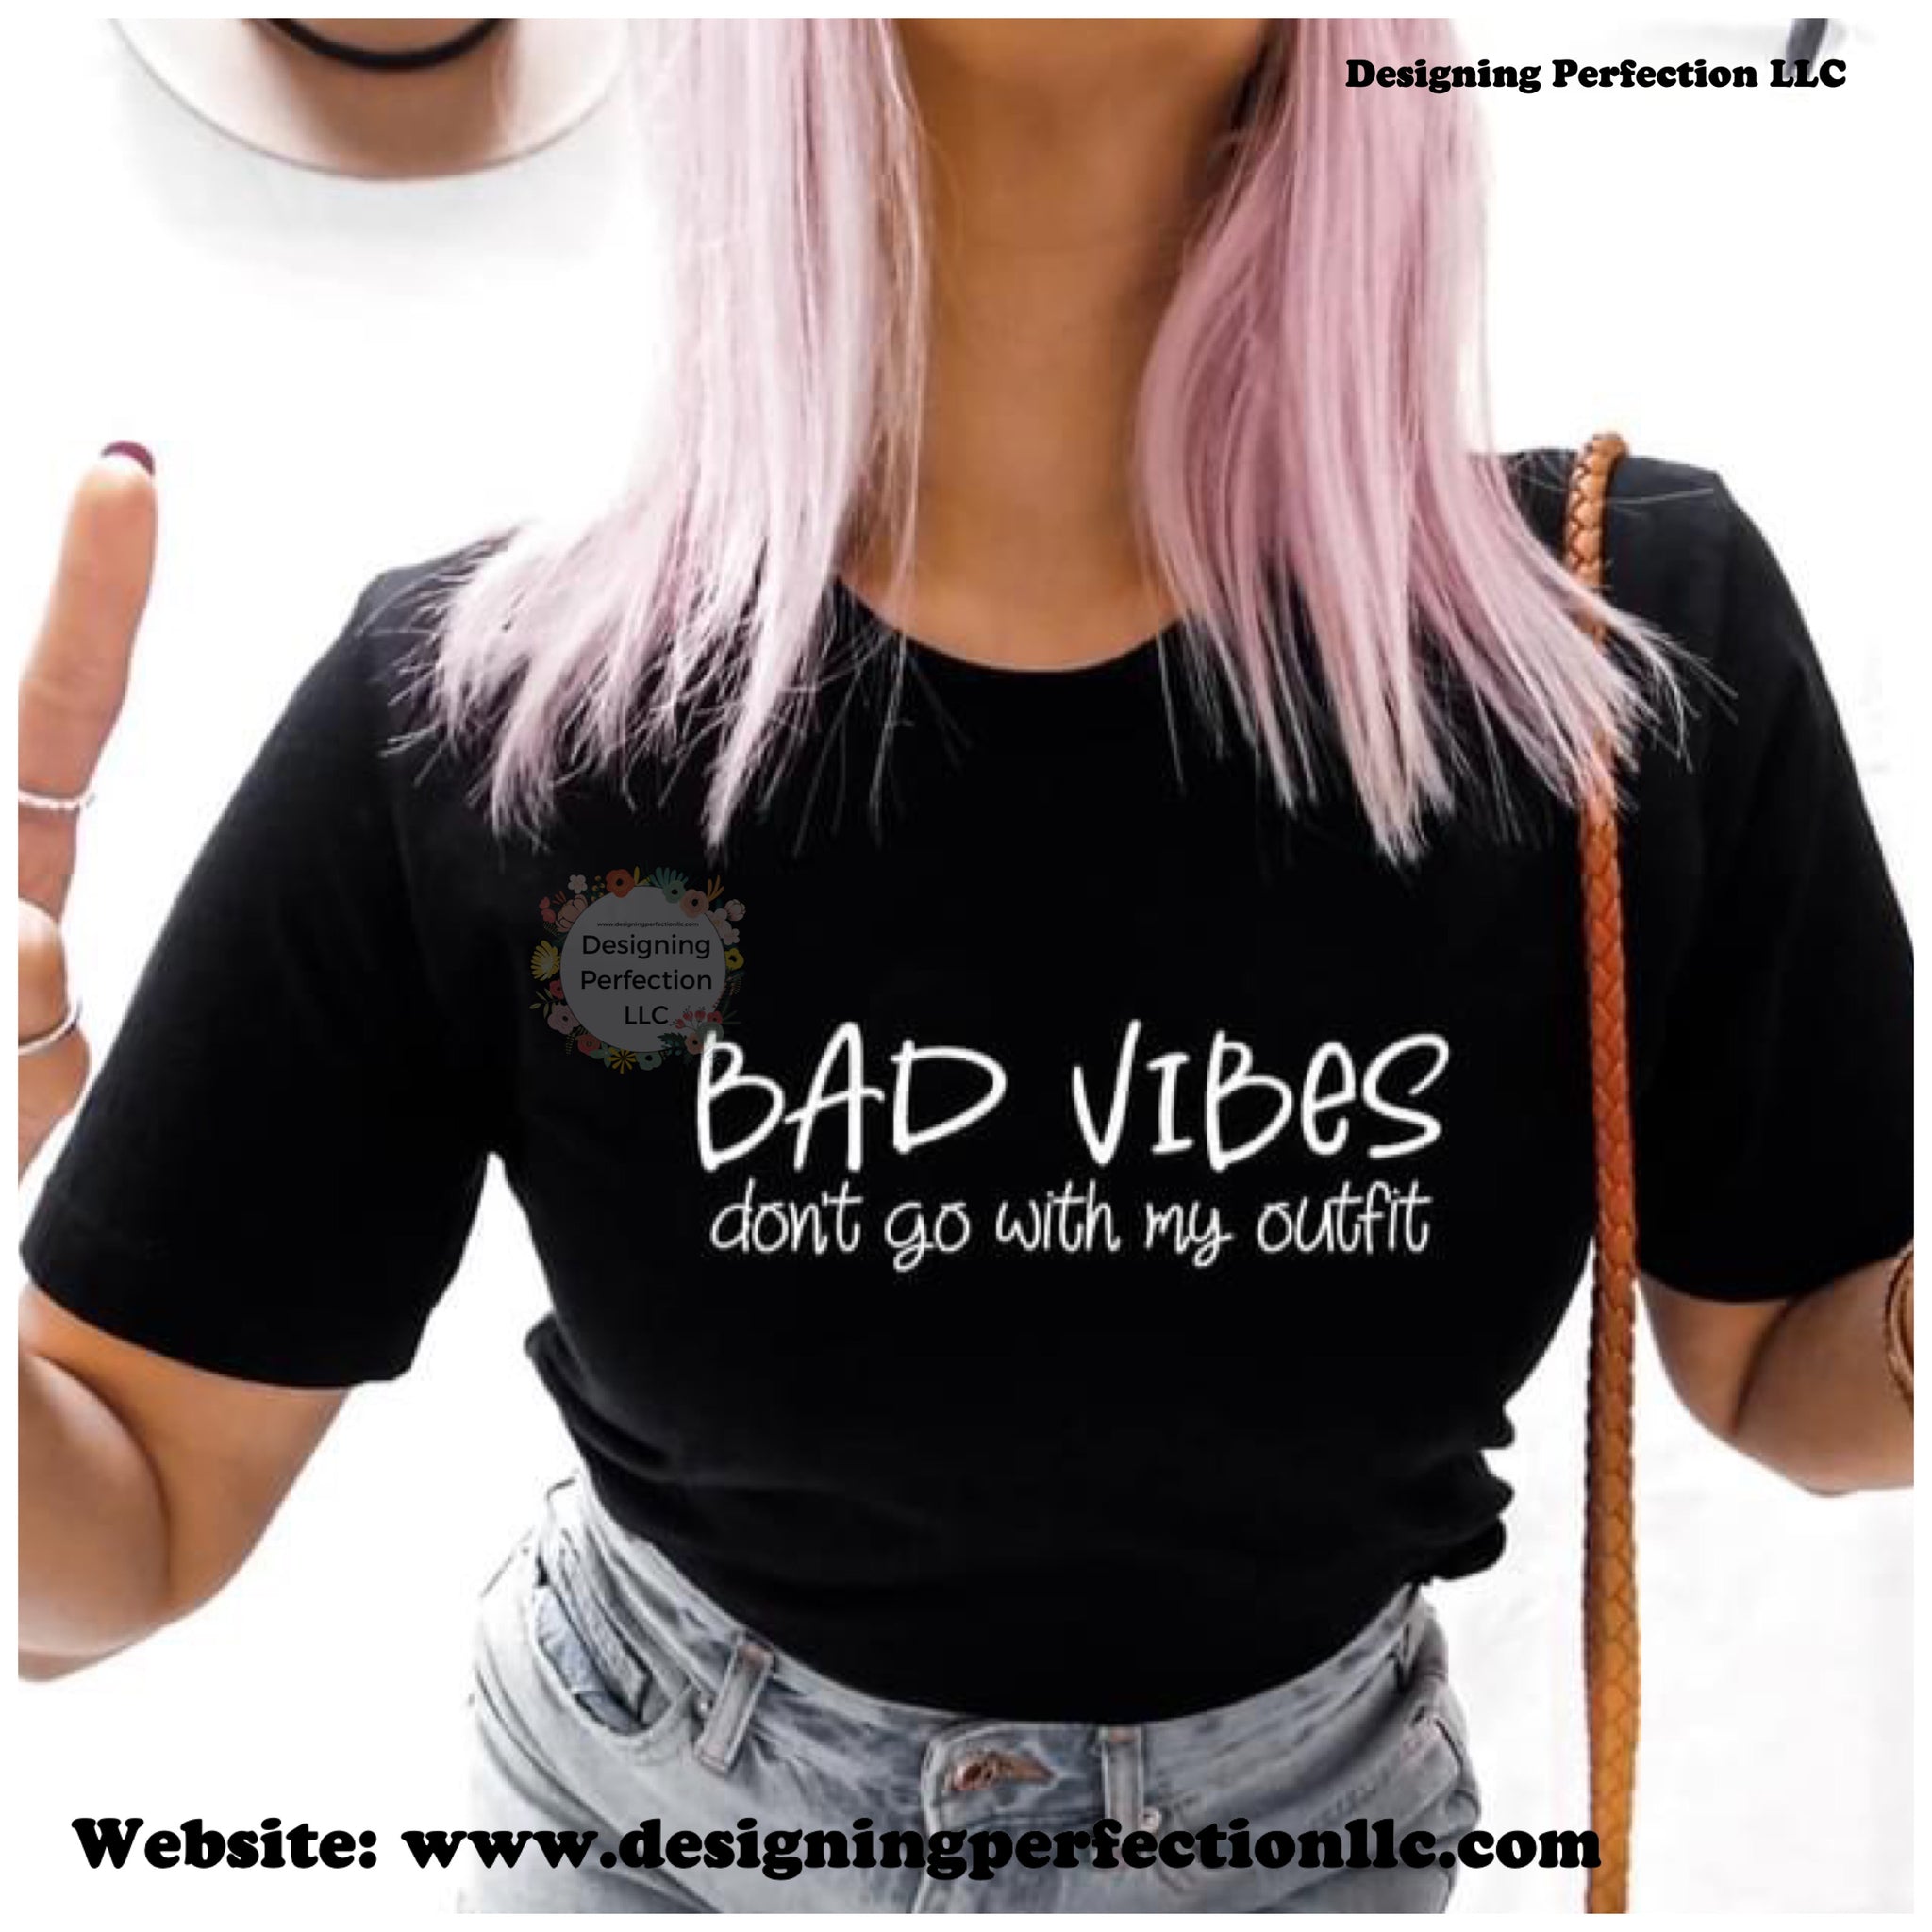 Bad vibes don’t go with my outfit (11)